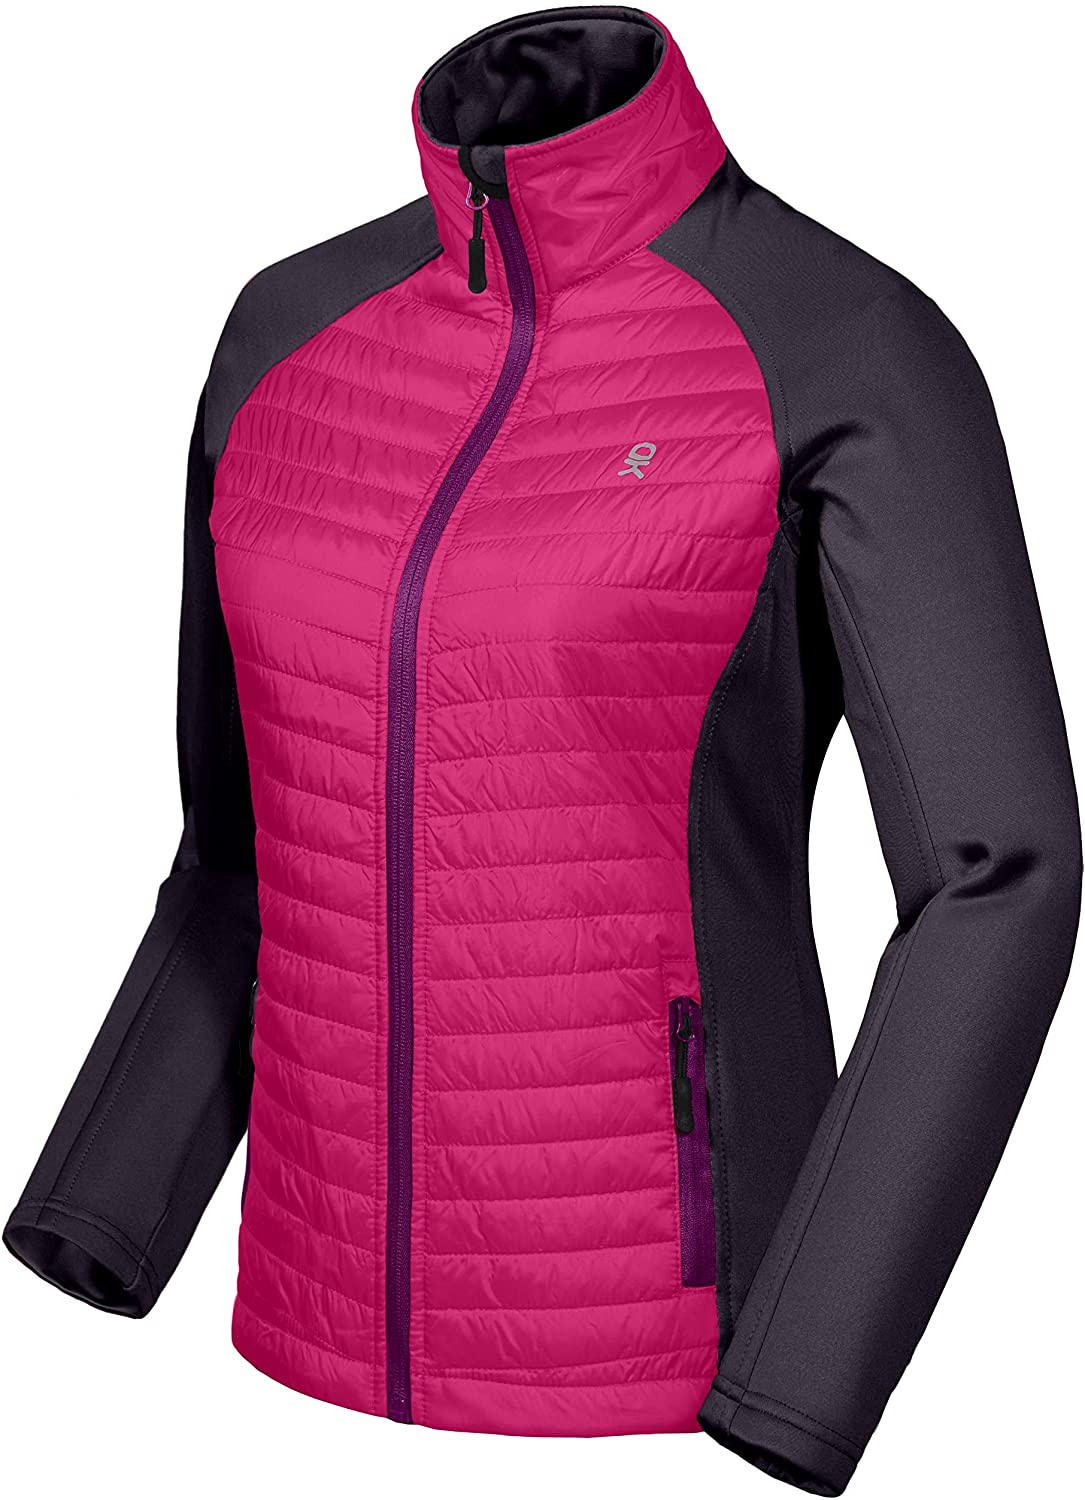 Lightweight Breathable and Warm Thermal Running Hybrid Jacket Little Donkey Andy Women's Insulated Hiking Jacket 